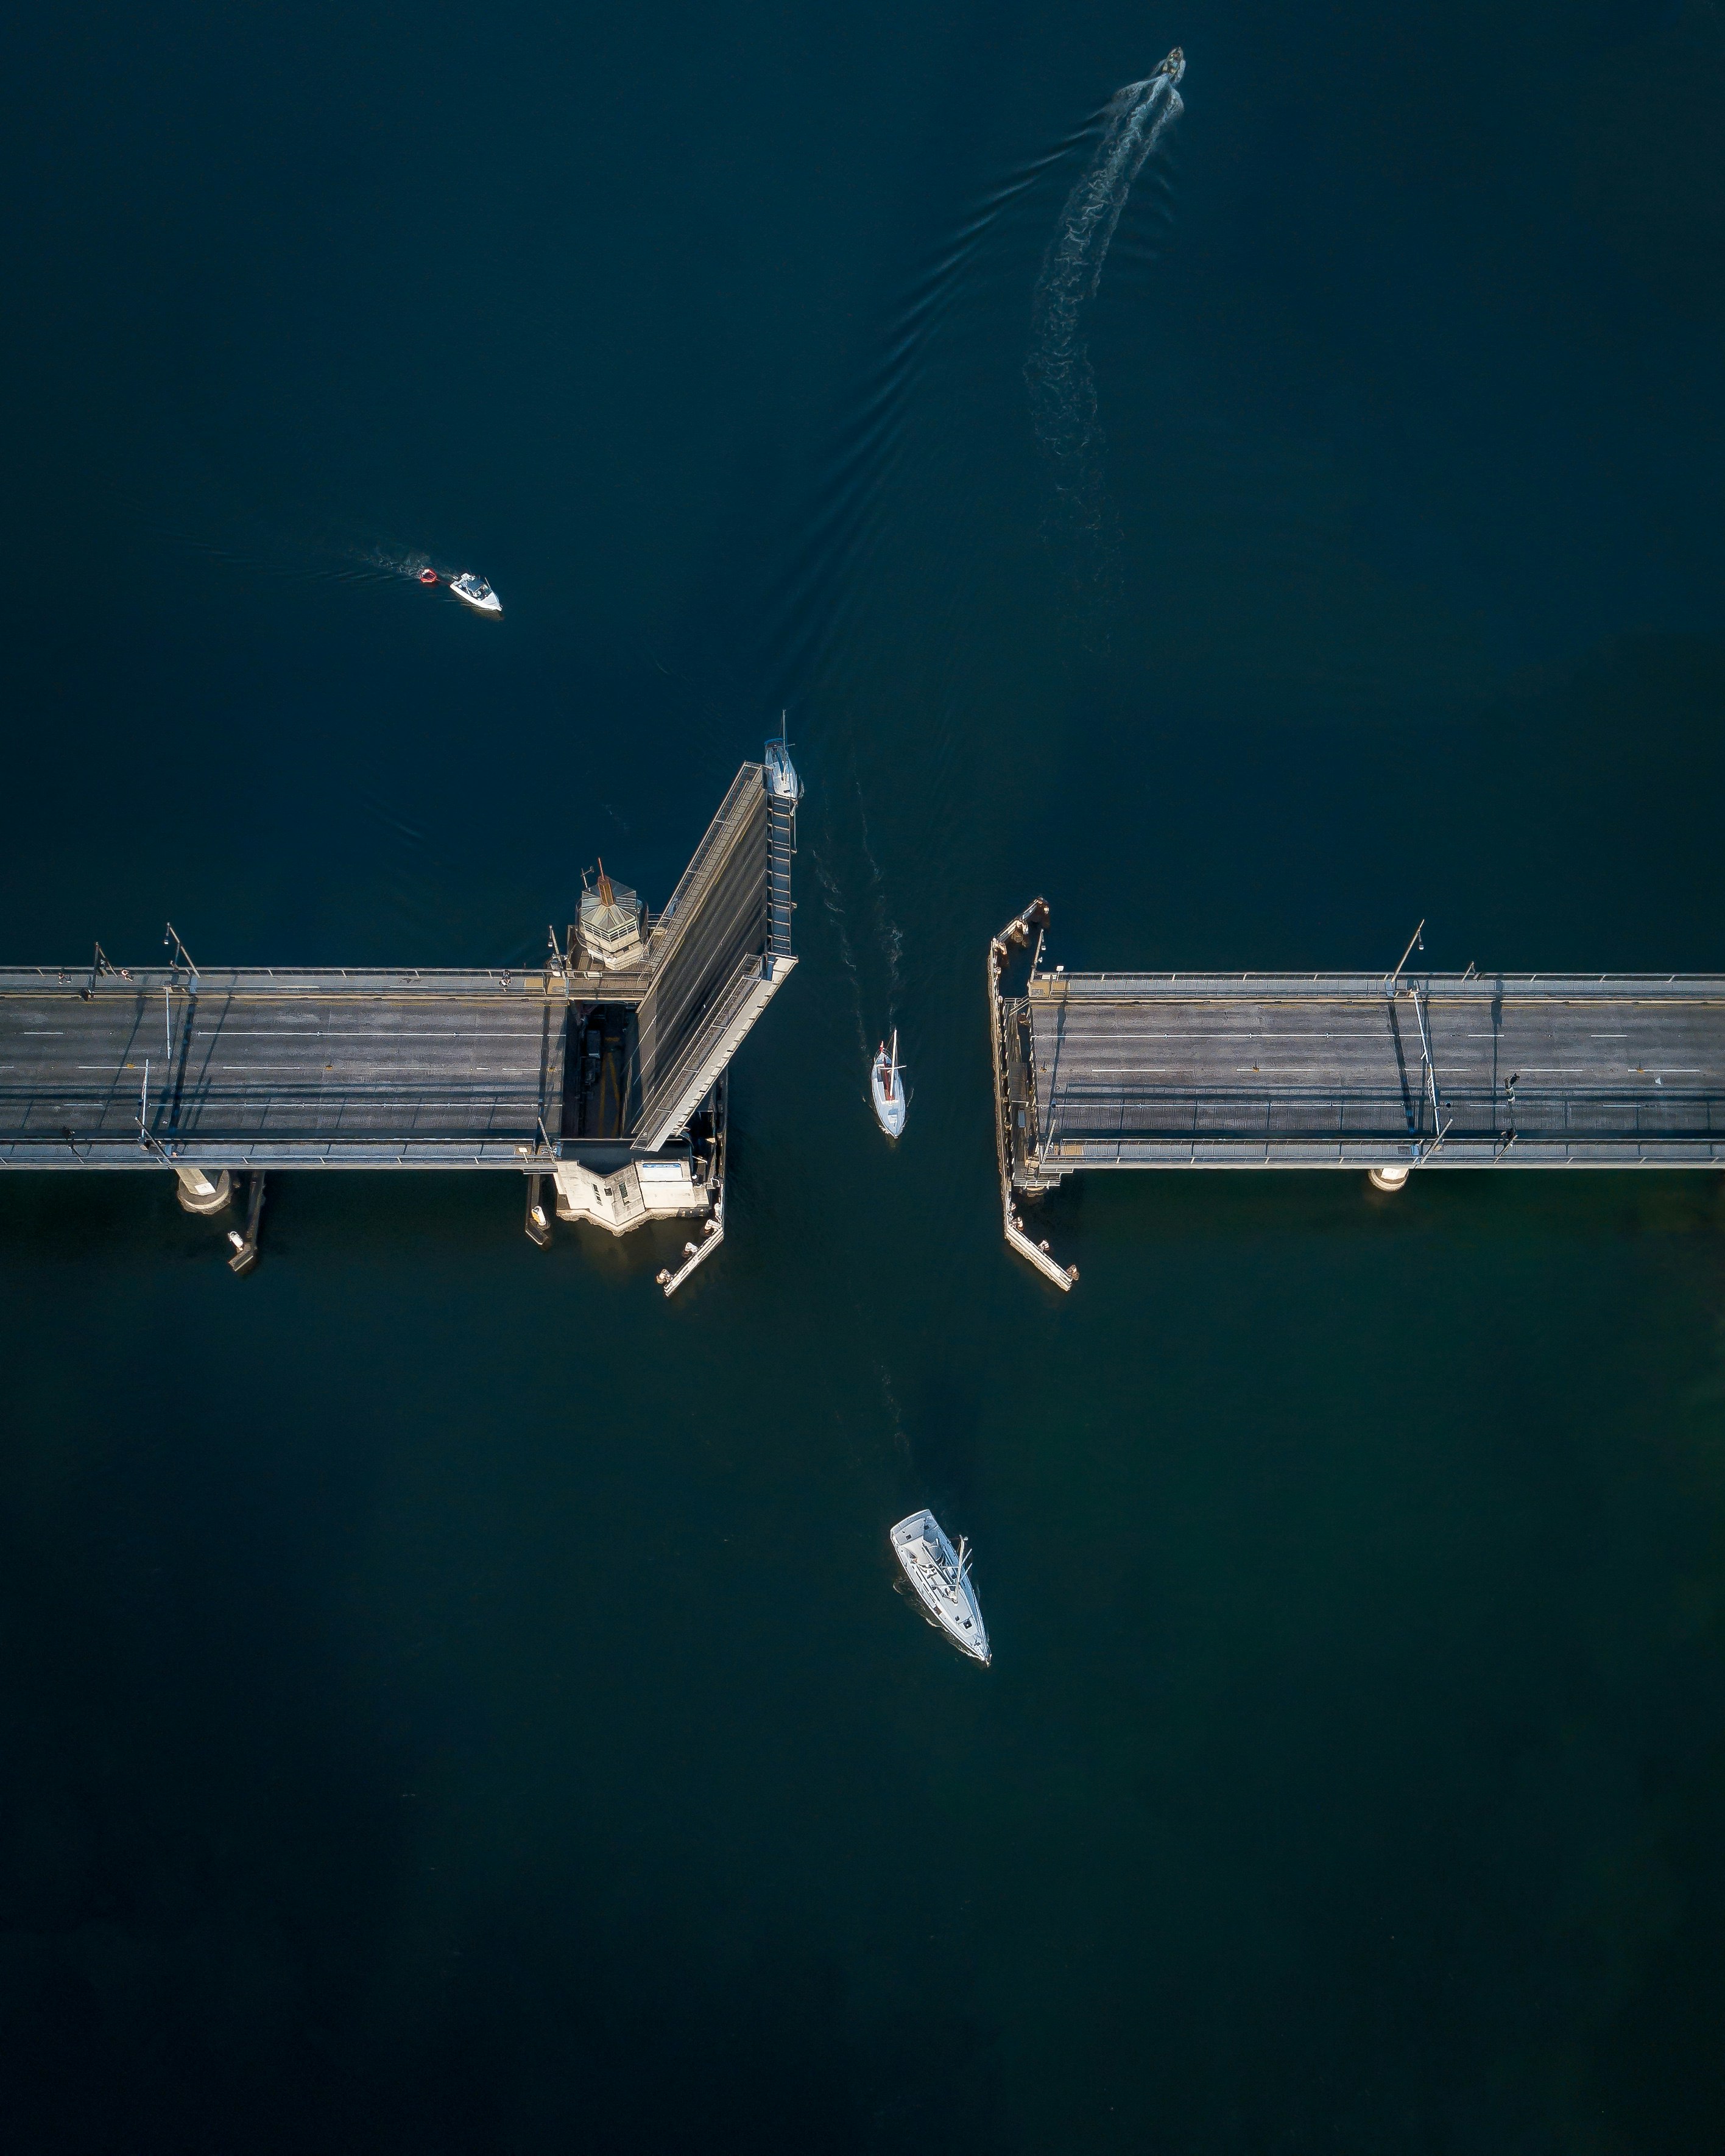 boat crossing on the bridge aerial view